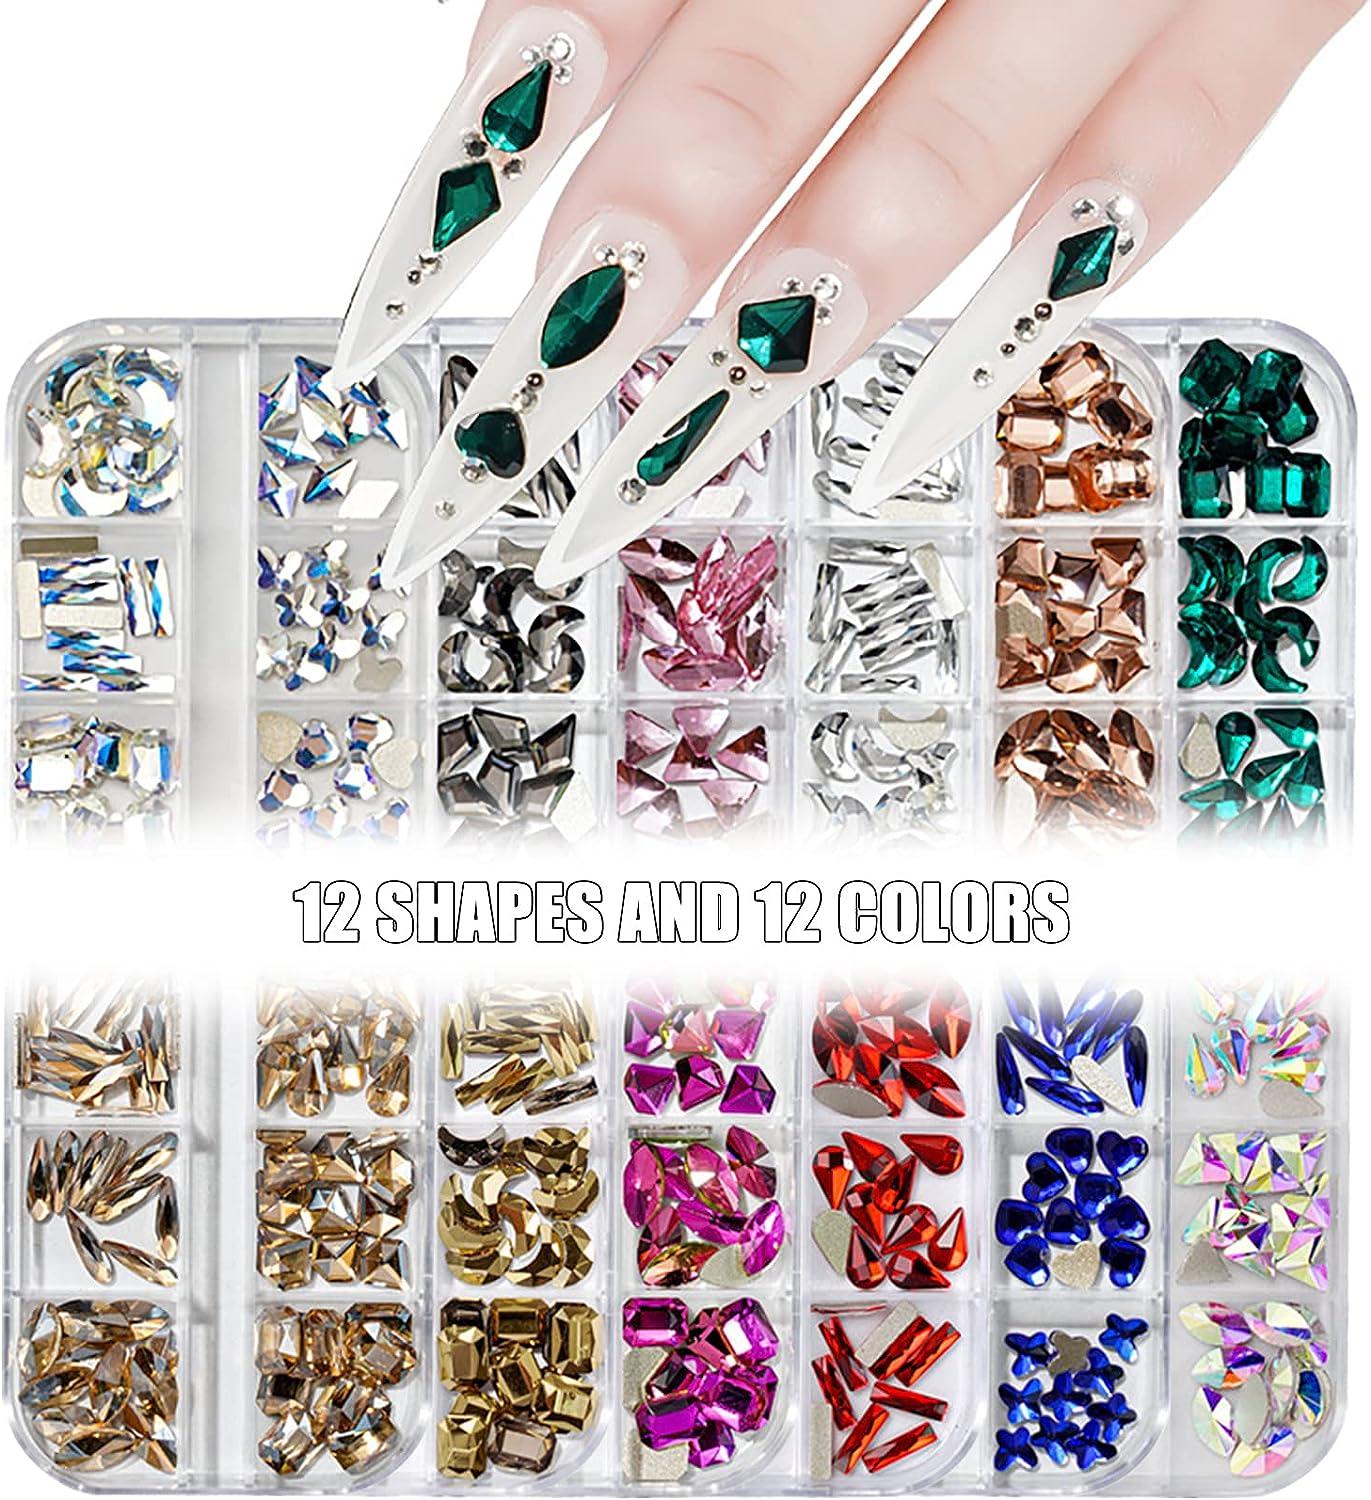 3mm clear silver rhinestones,home decoration colorful loose rhinestones  point back stones nail art crystals color mix ss12 - AliExpress